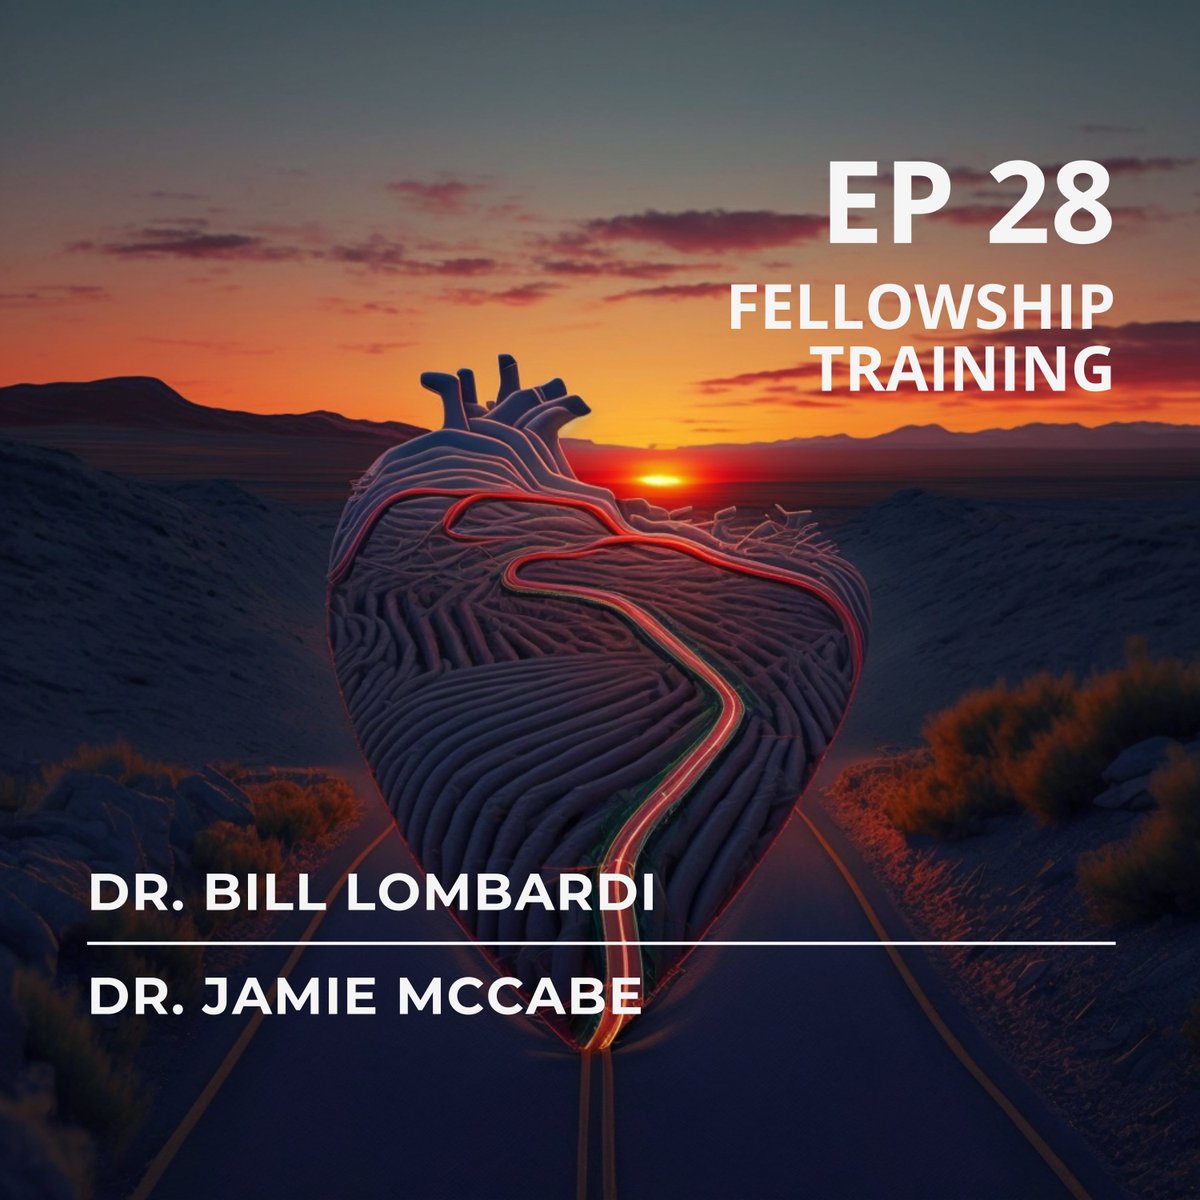 @jamiemccabeMD leads our structural heart fellowship program at @UWMedHeart. We discuss his experiences as a trainee and his role now as a mentor/teacher and the challenges of teaching interventional therapies. drjourneytobetter.com Fellowship Info: cardiology.uw.edu/education/subs…